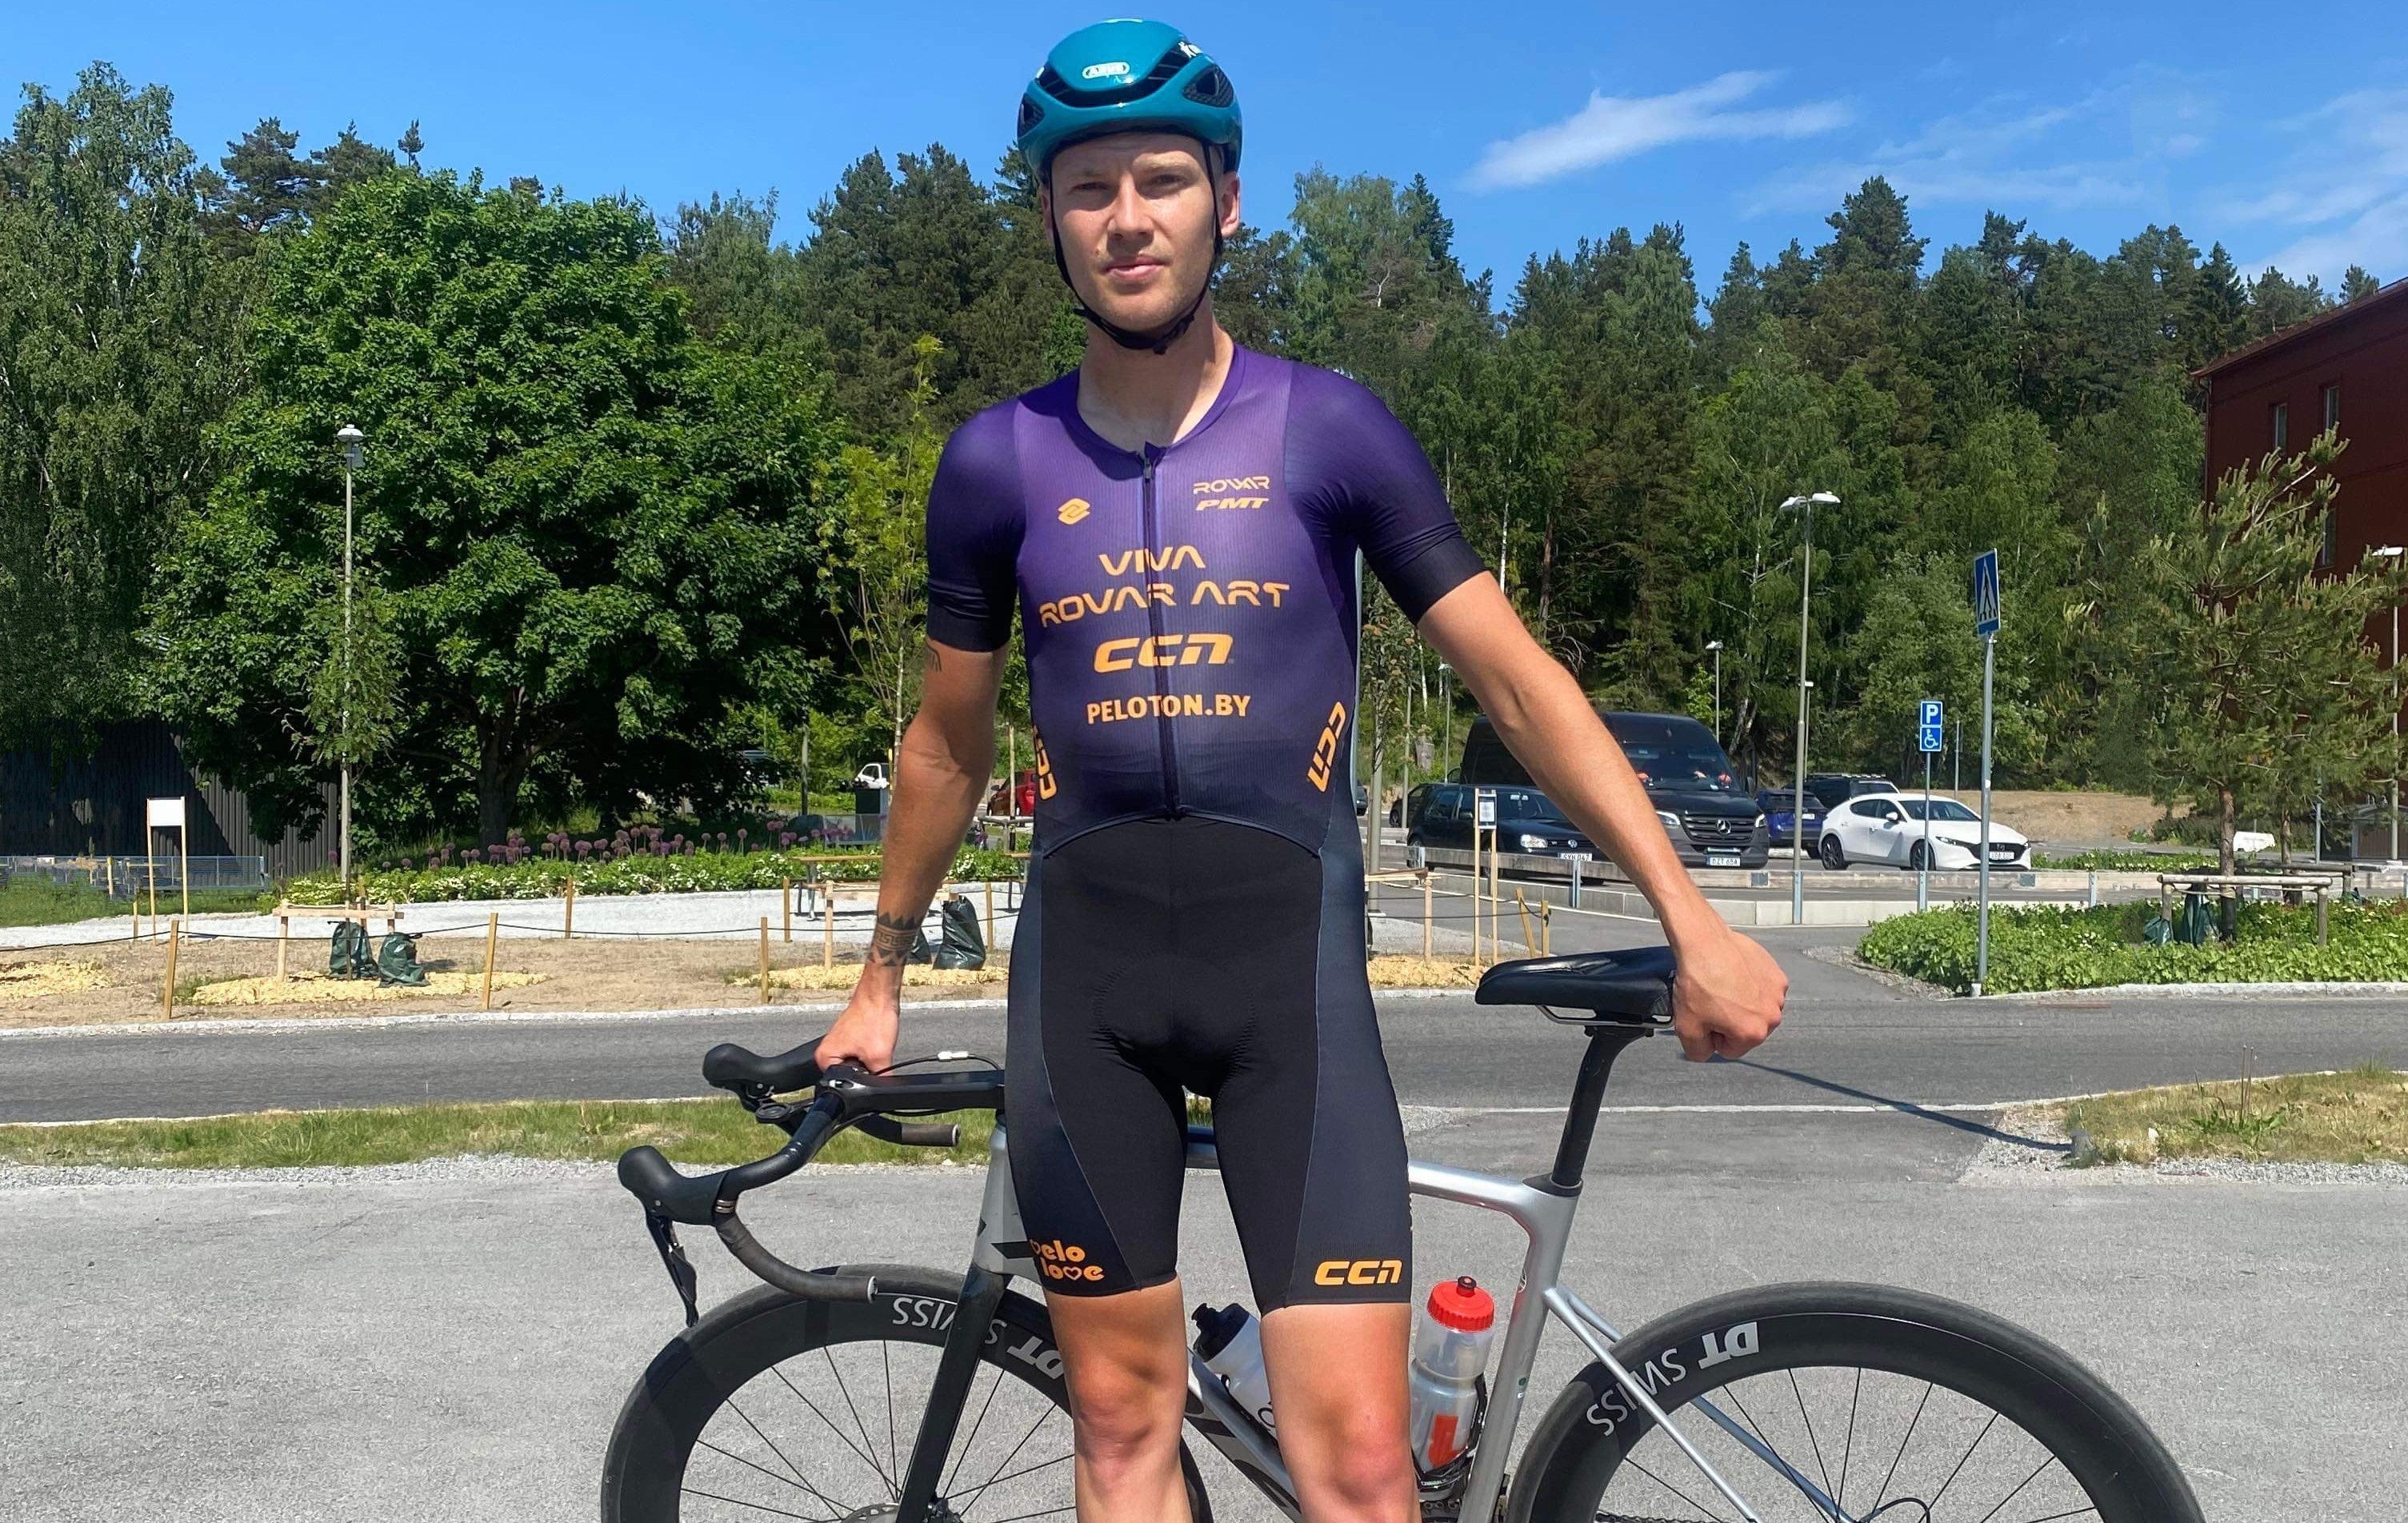 Hannes Bergstrom Frisk: Swedish Star Continues to Shine in CCN Gear with Team Viva Rovar Art